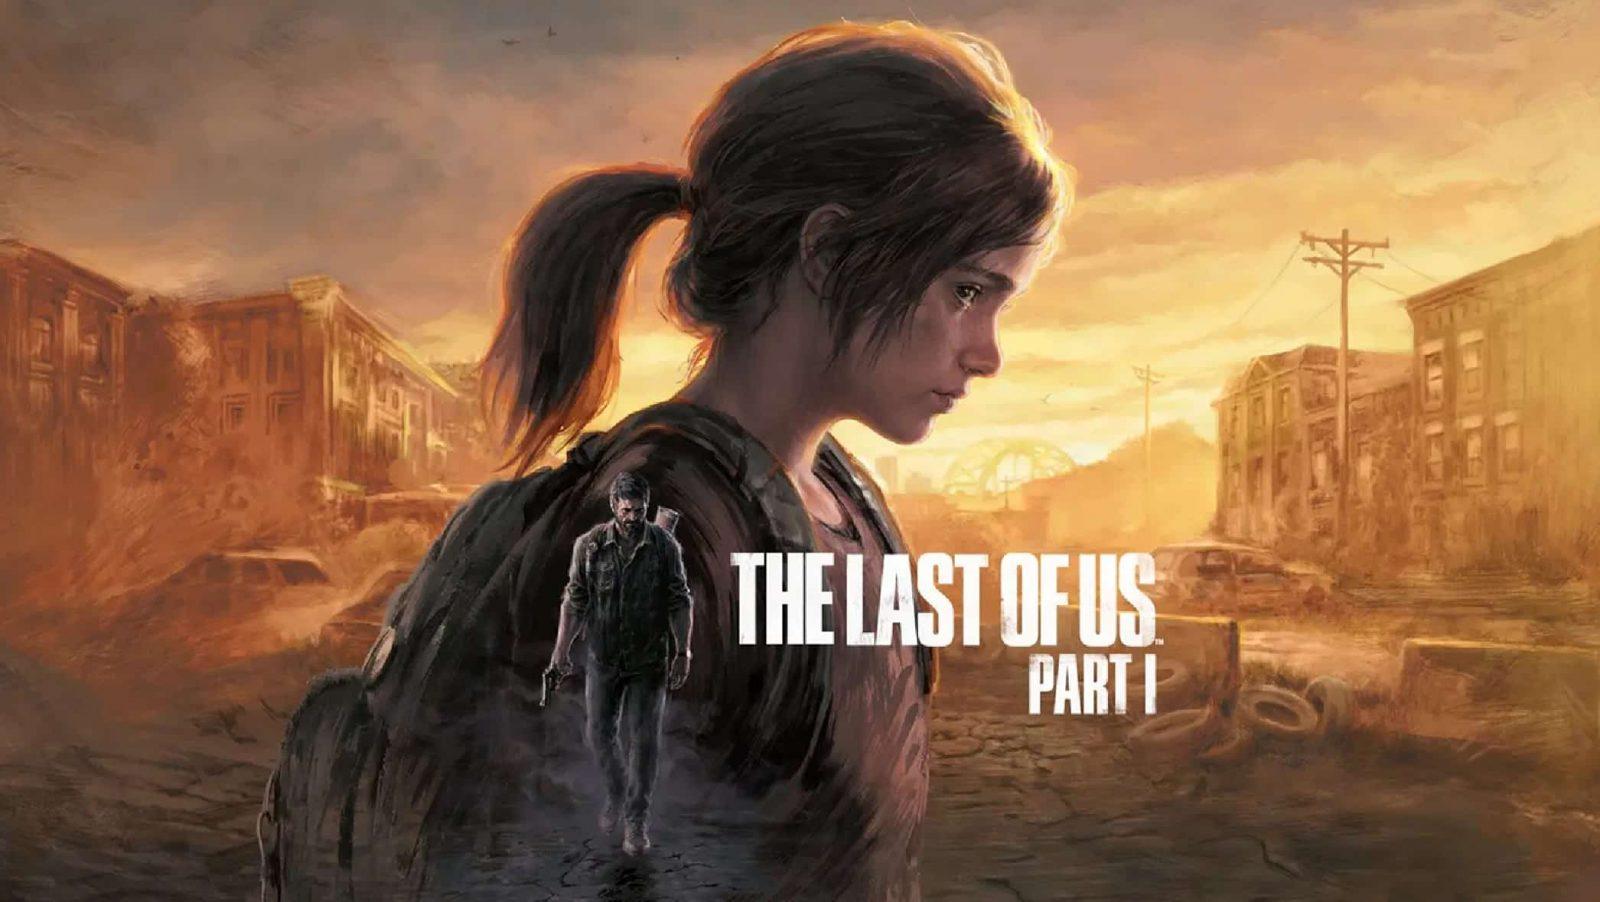 The Last of Us Part 1 remake cover art